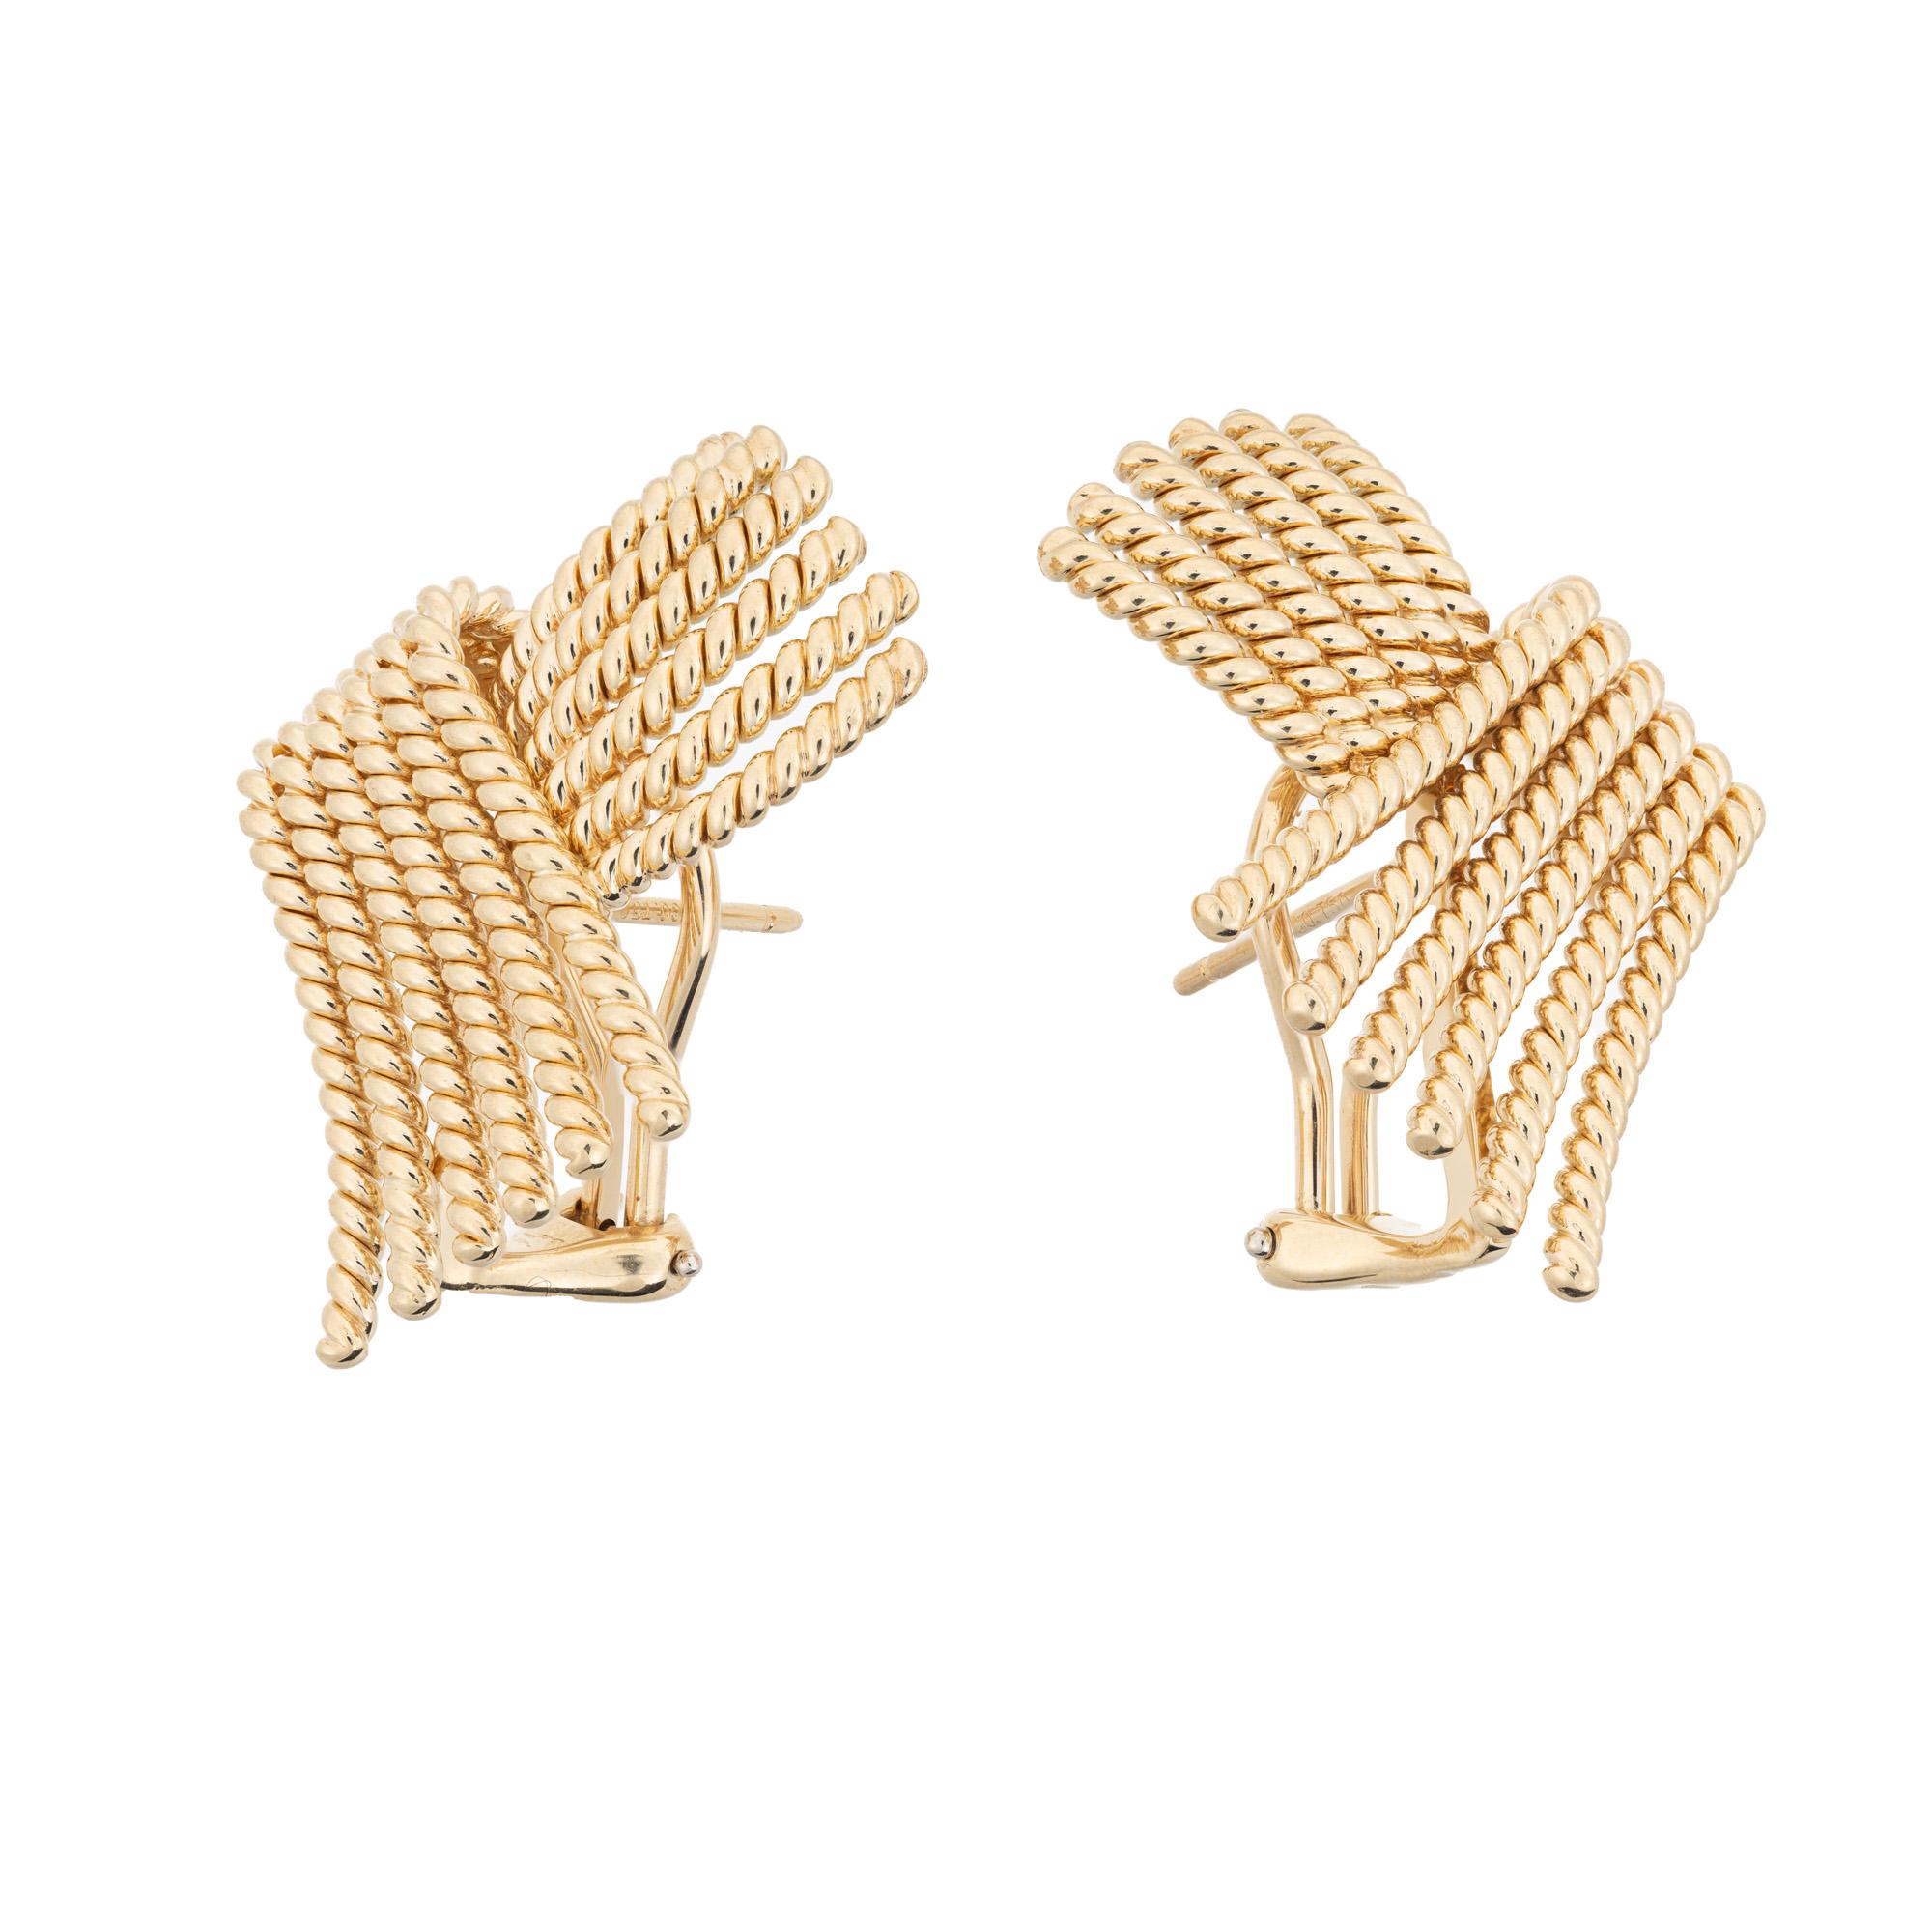 Tiffany & Co. 18k yellow gold clip post earrings. Designed for Tiffany by Jean Schlumberger, each earring has 12 strands of twisted rope wire motif. The backings are clip post lever style. They date back to the early 1980's. 
Jean Michel